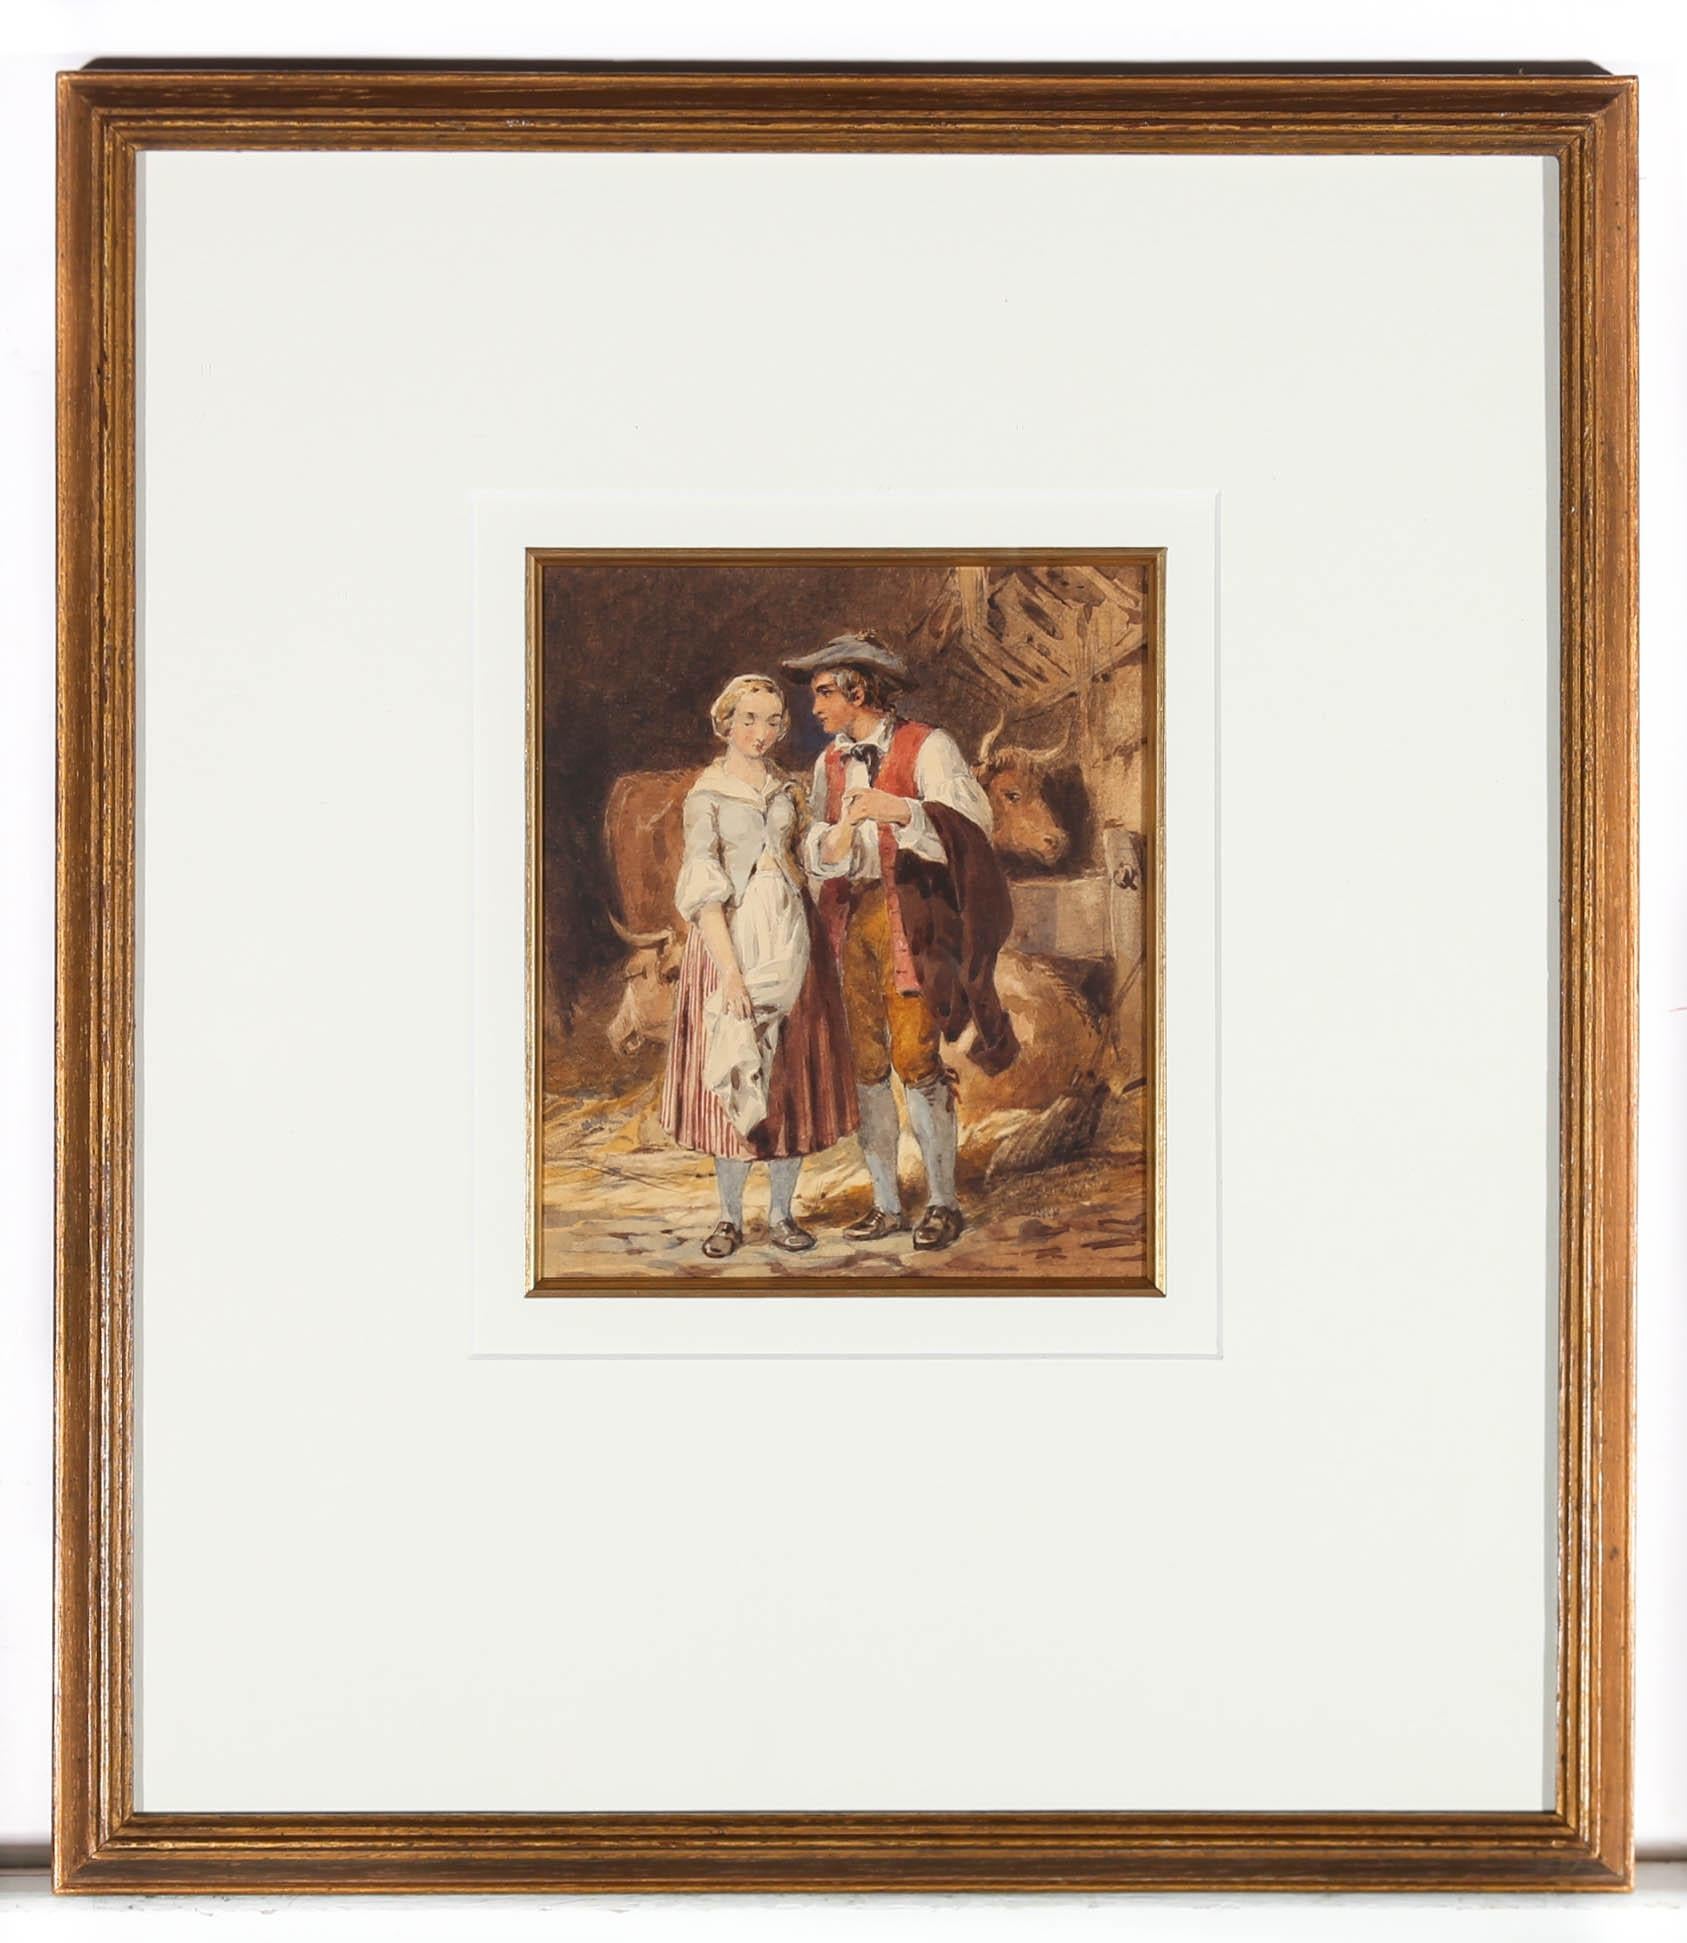 A fine late 19th century watercolour showing a young courting couple together in a cattle shed. The gentleman is pictured holding the lady's hand, mesmerised by her pure beauty. While the lady on the other hand looks sad and tearful, staring at the